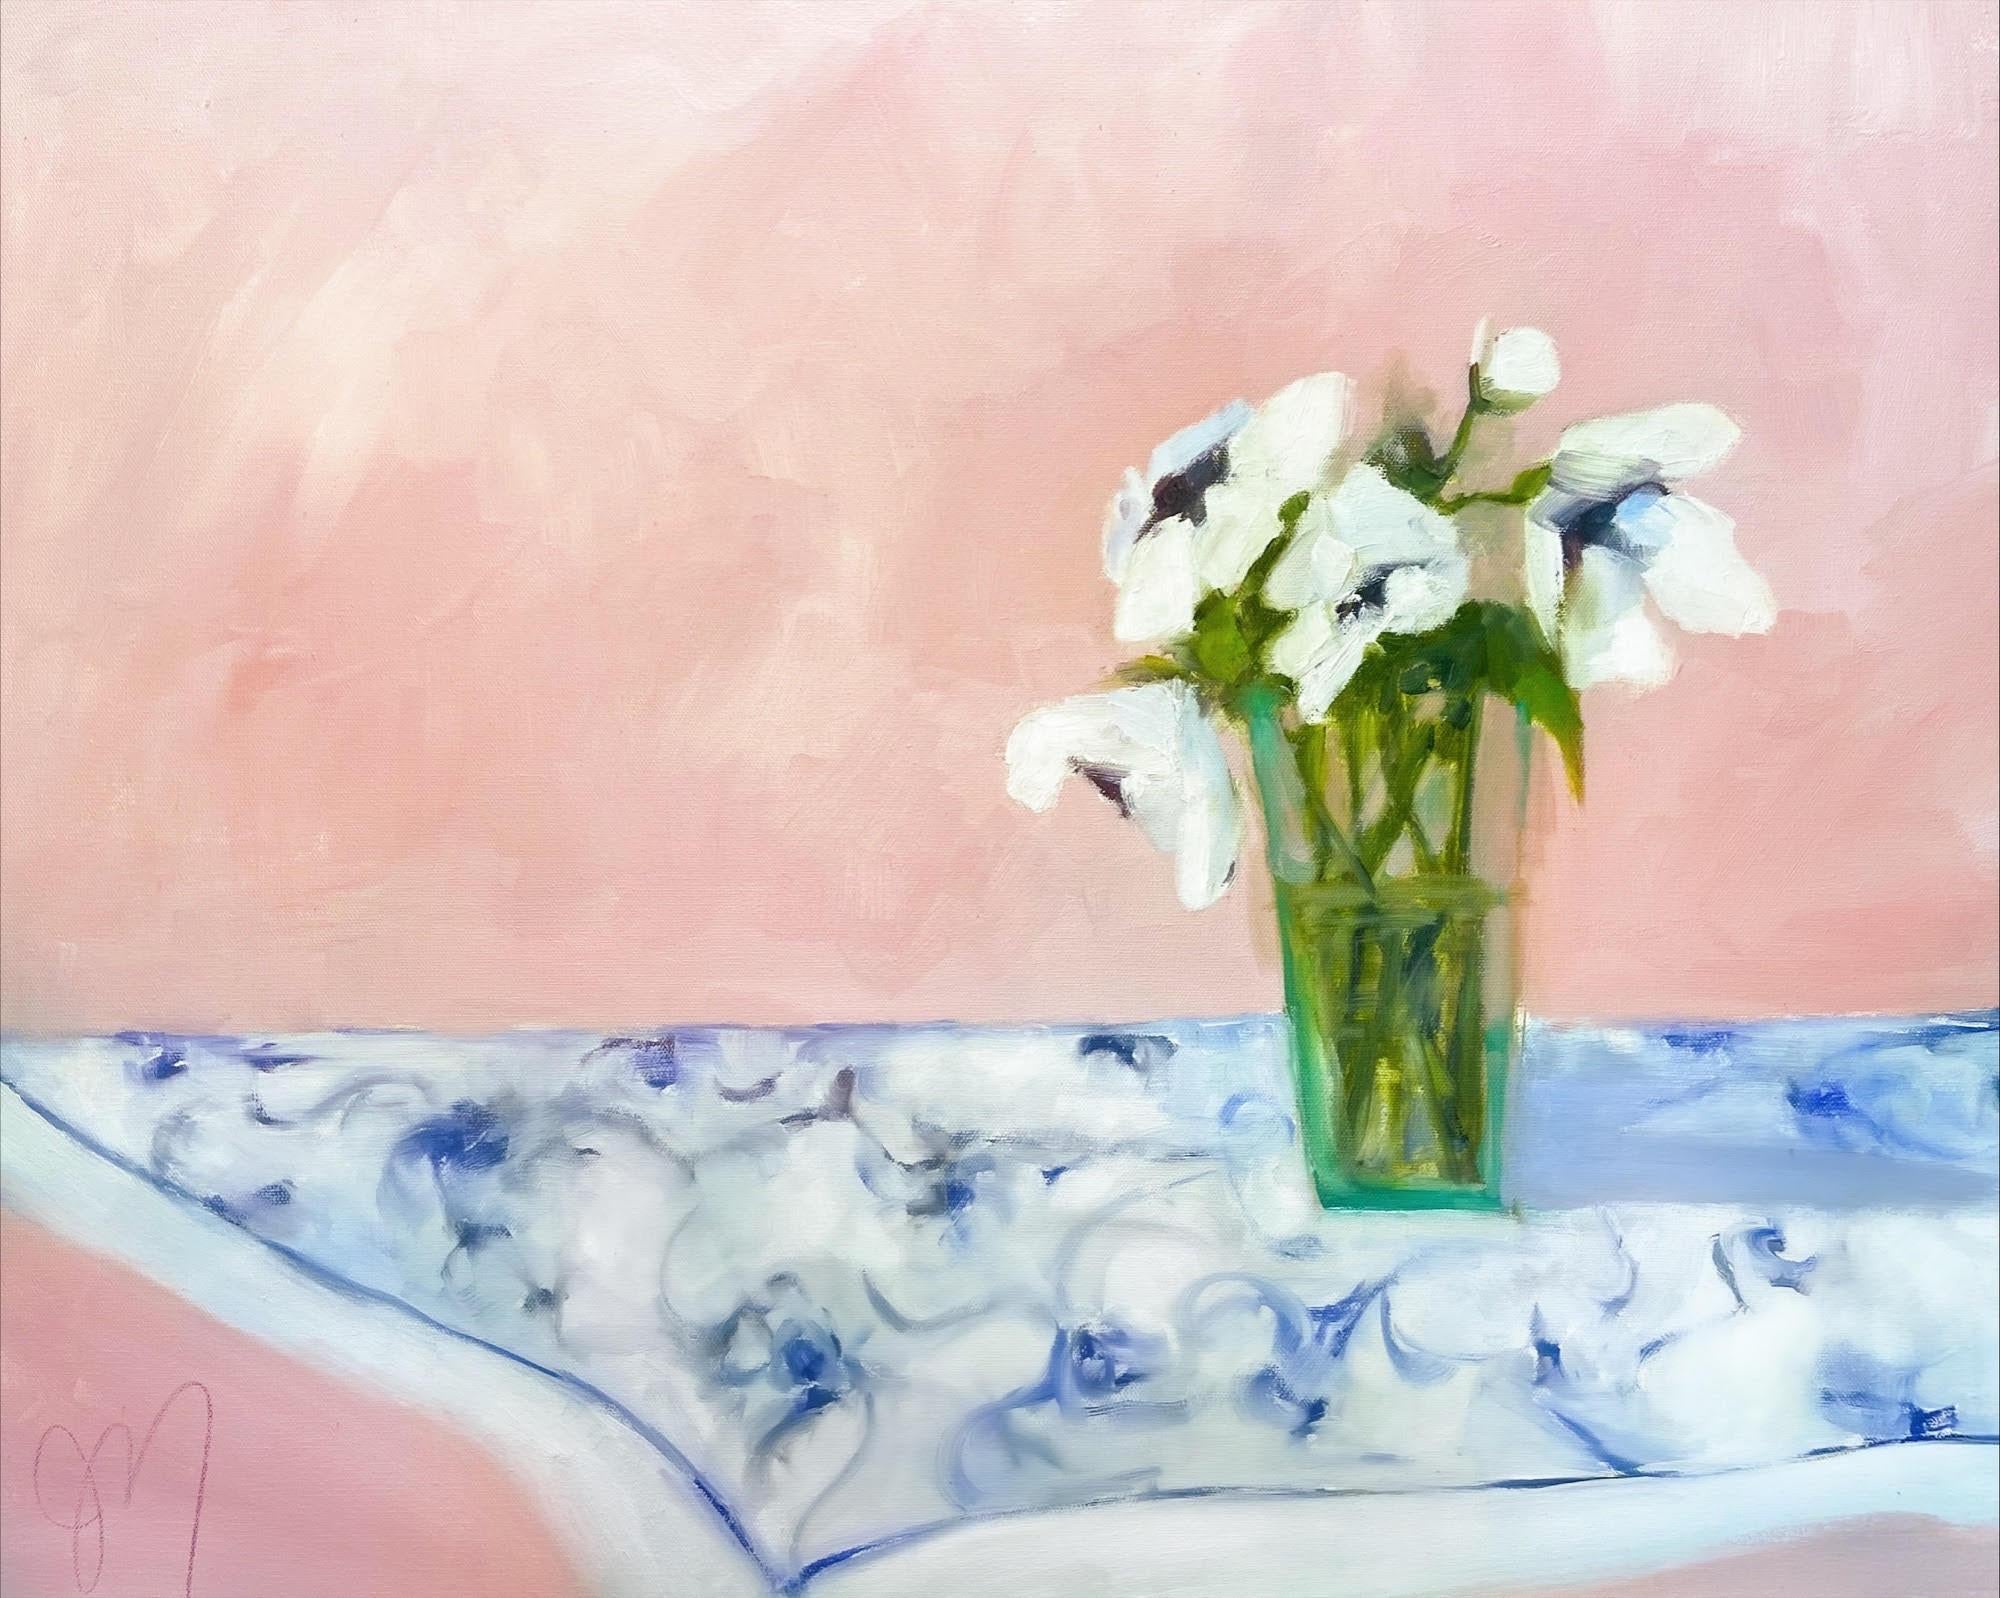 Jill Matthews Figurative Painting - "Picnic Poppies" Assorted poppies in a clear vase on a blue and white tablecloth